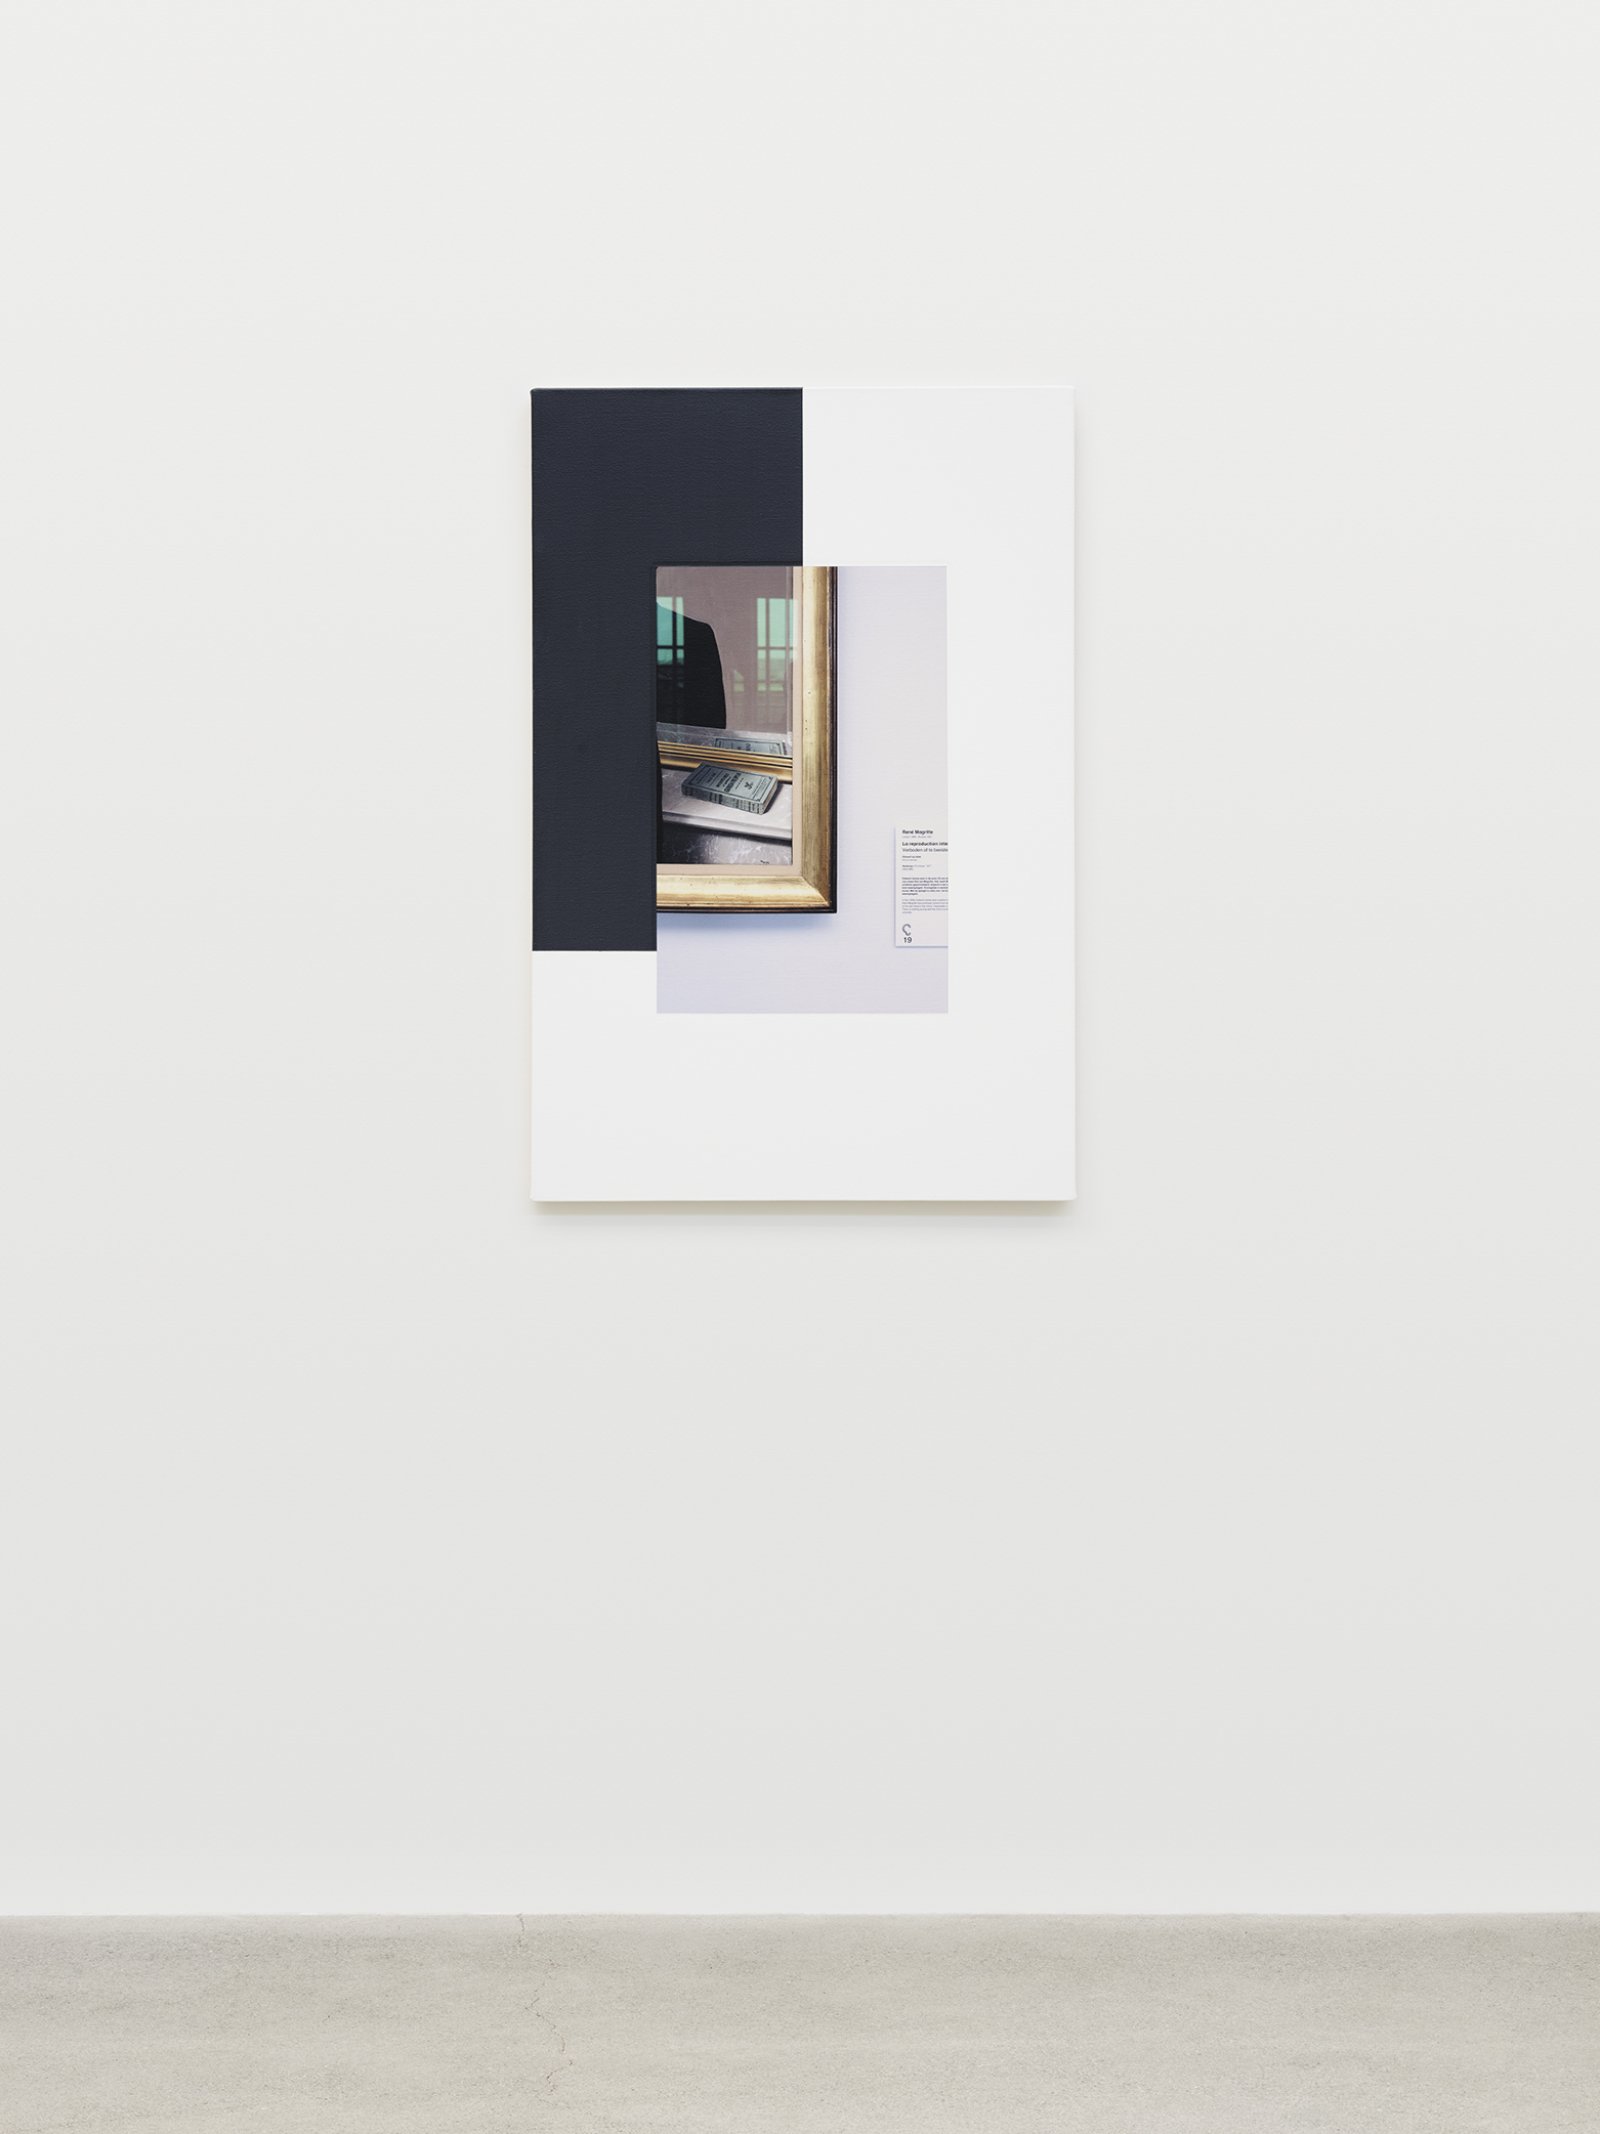 Ian Wallace, Abstract Composition (with Magritte), 2011, photolaminate with acrylic on canvas, 36 x 24 in. (91 x 61 cm)